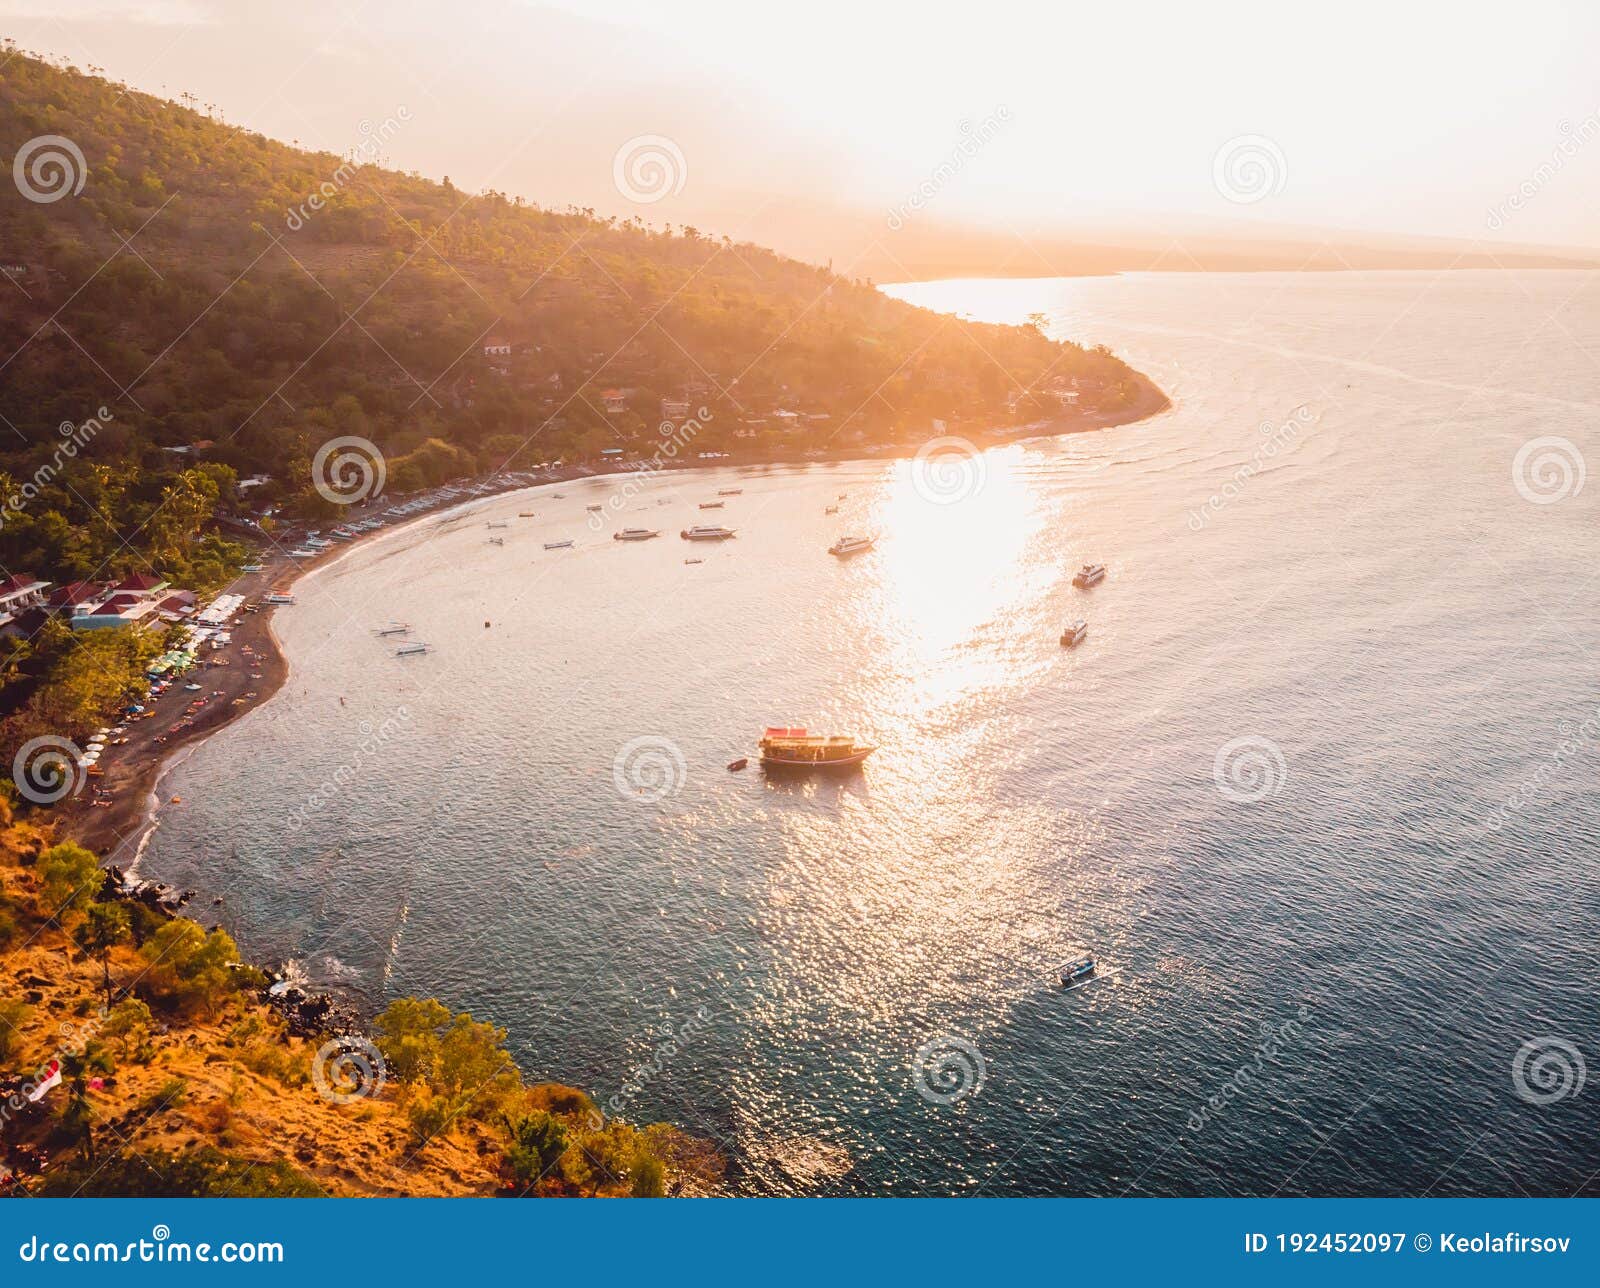 aerial view of sea with mountains and local boats in amed, bali with sunset lights